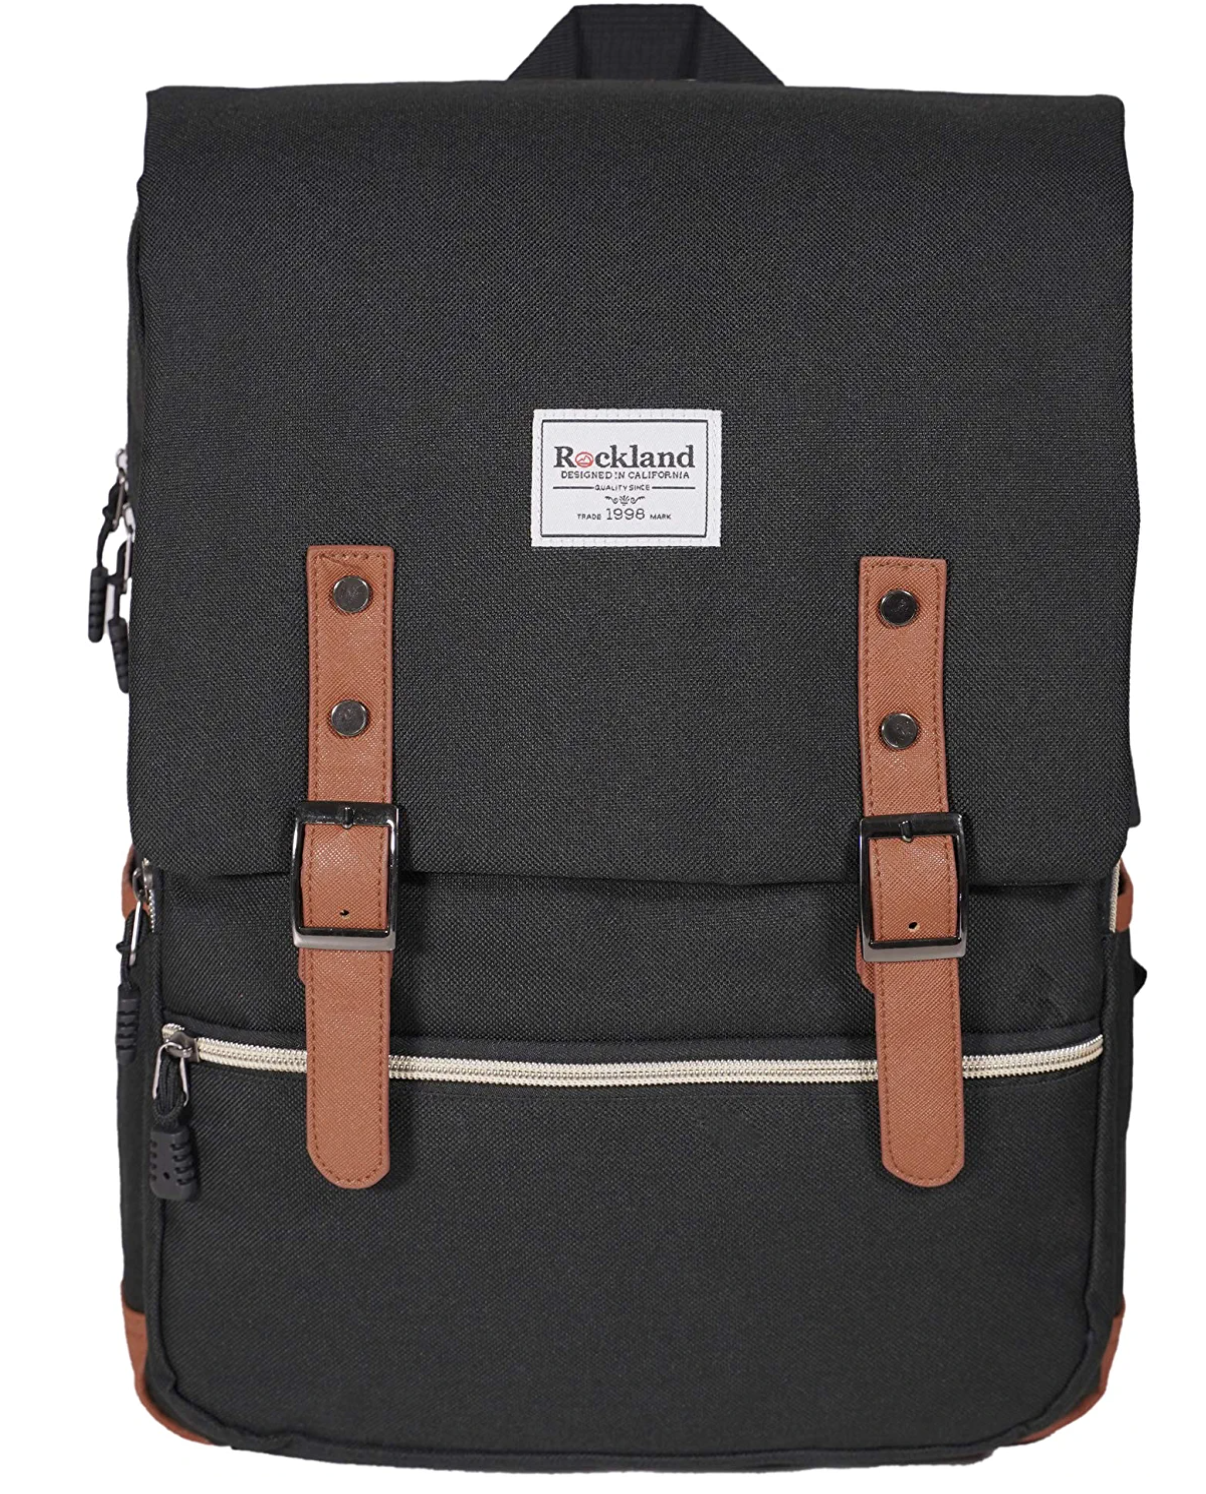 NIP Rockland Heritage USB Laptop Backpack, Black, Large with Built In Charger